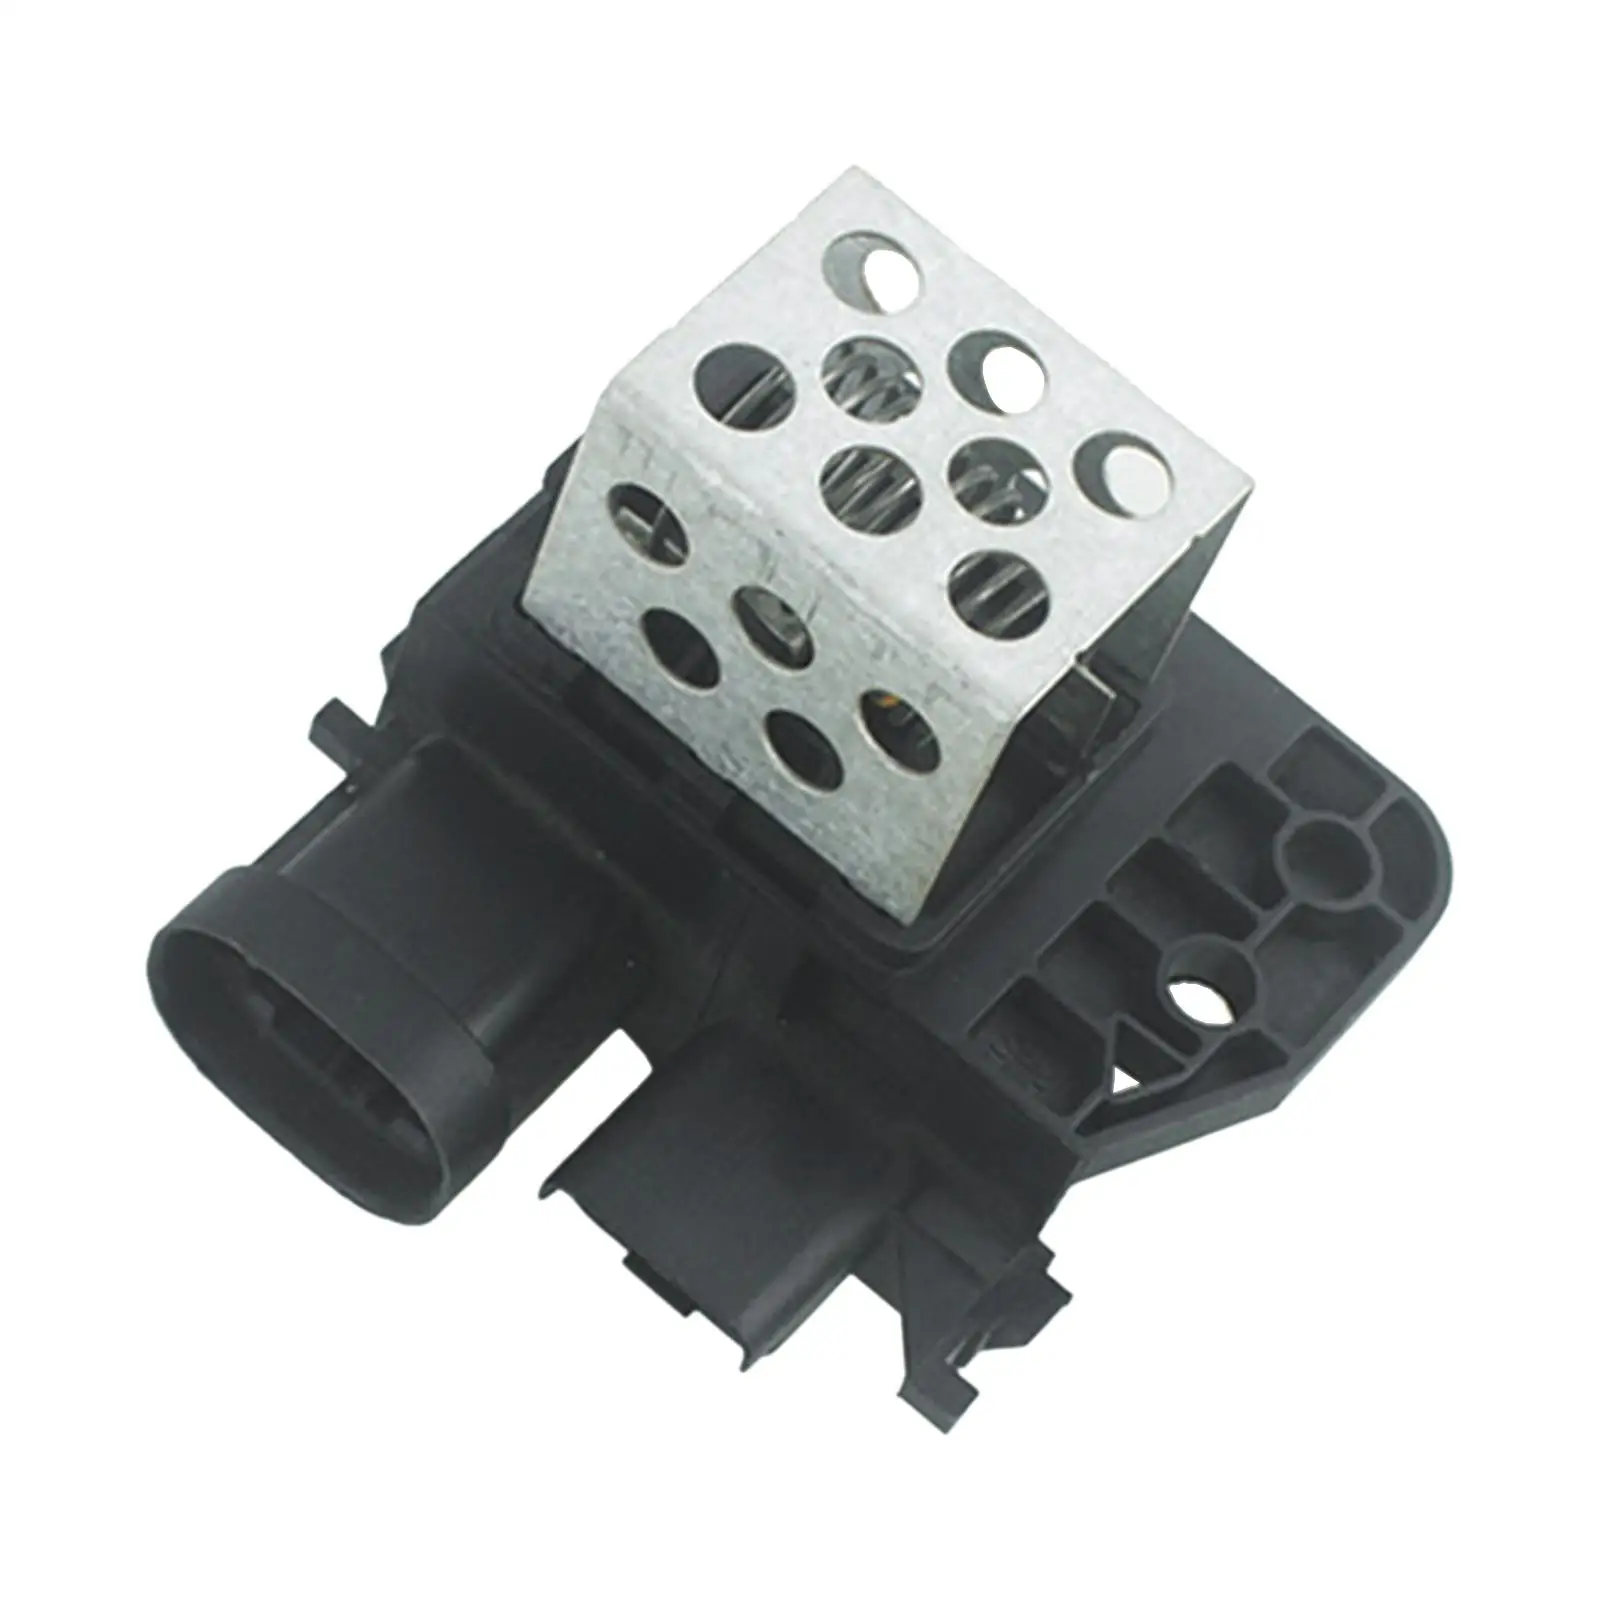 Heater Blower Motor Resistance Radiator Motor Fan Heater Resistor 9673999980 for Peugeot Replaces Spare Parts